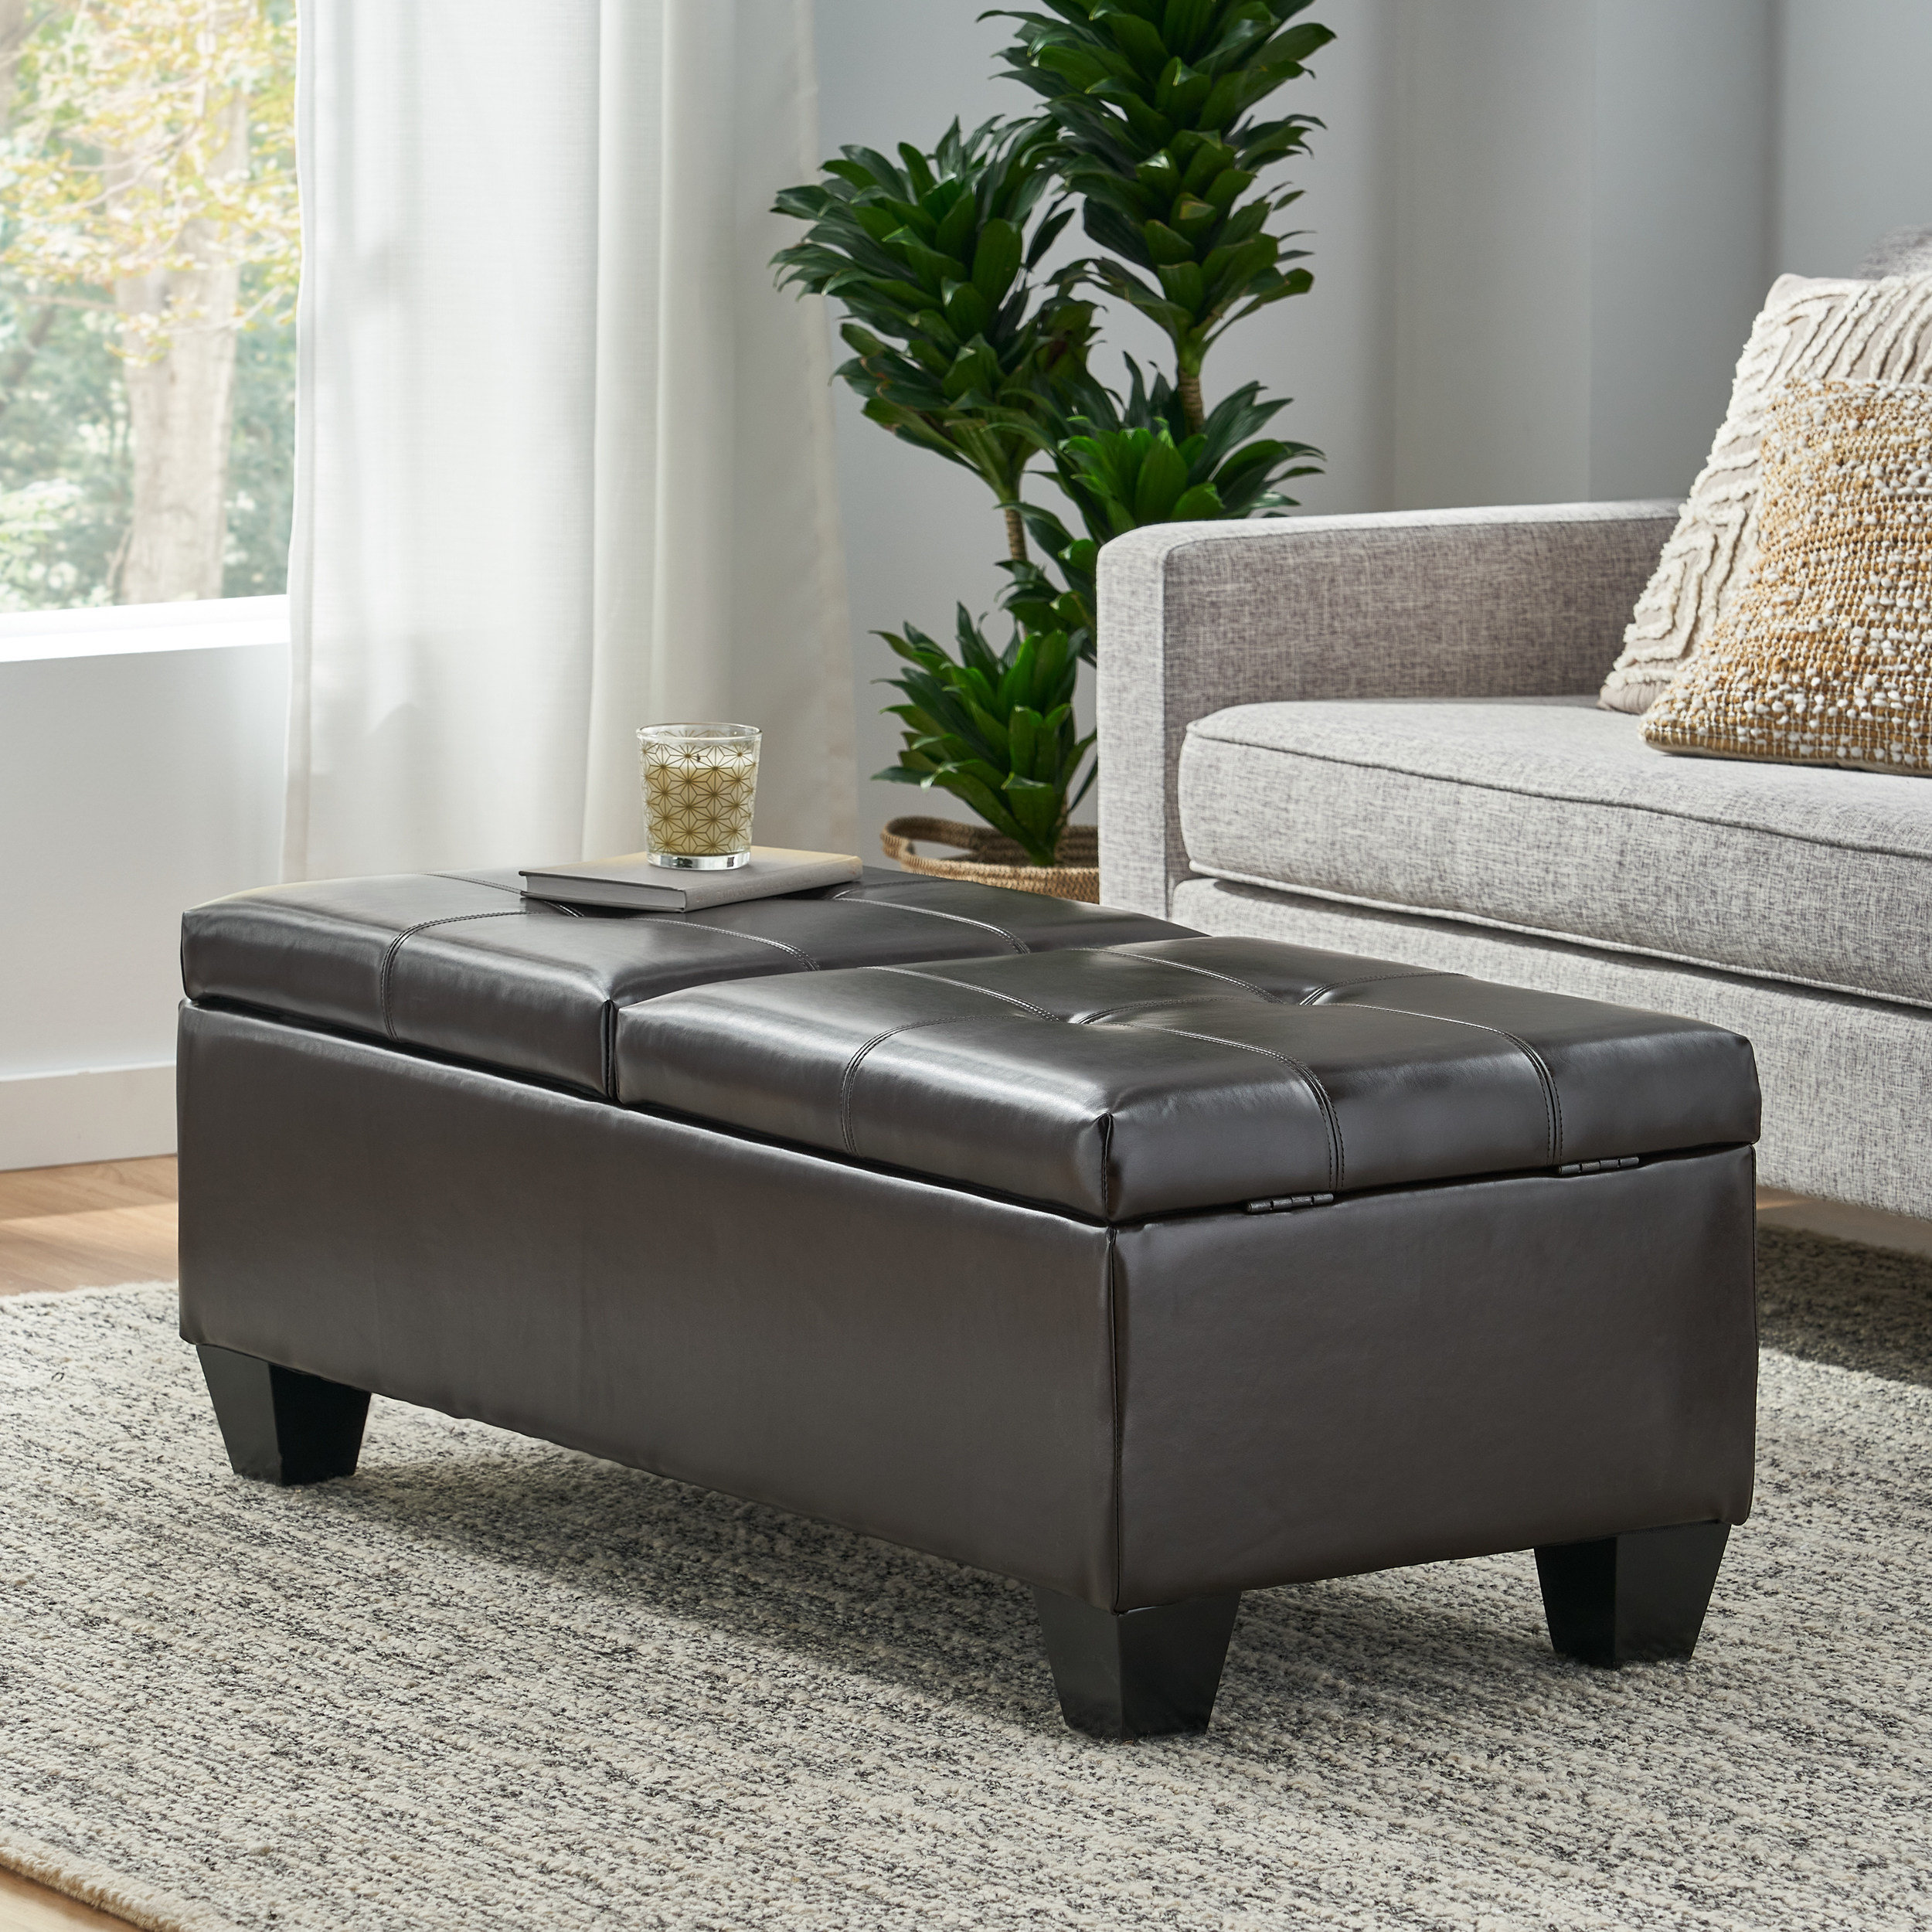 Faux Fur-Covered Ottomans - Gray